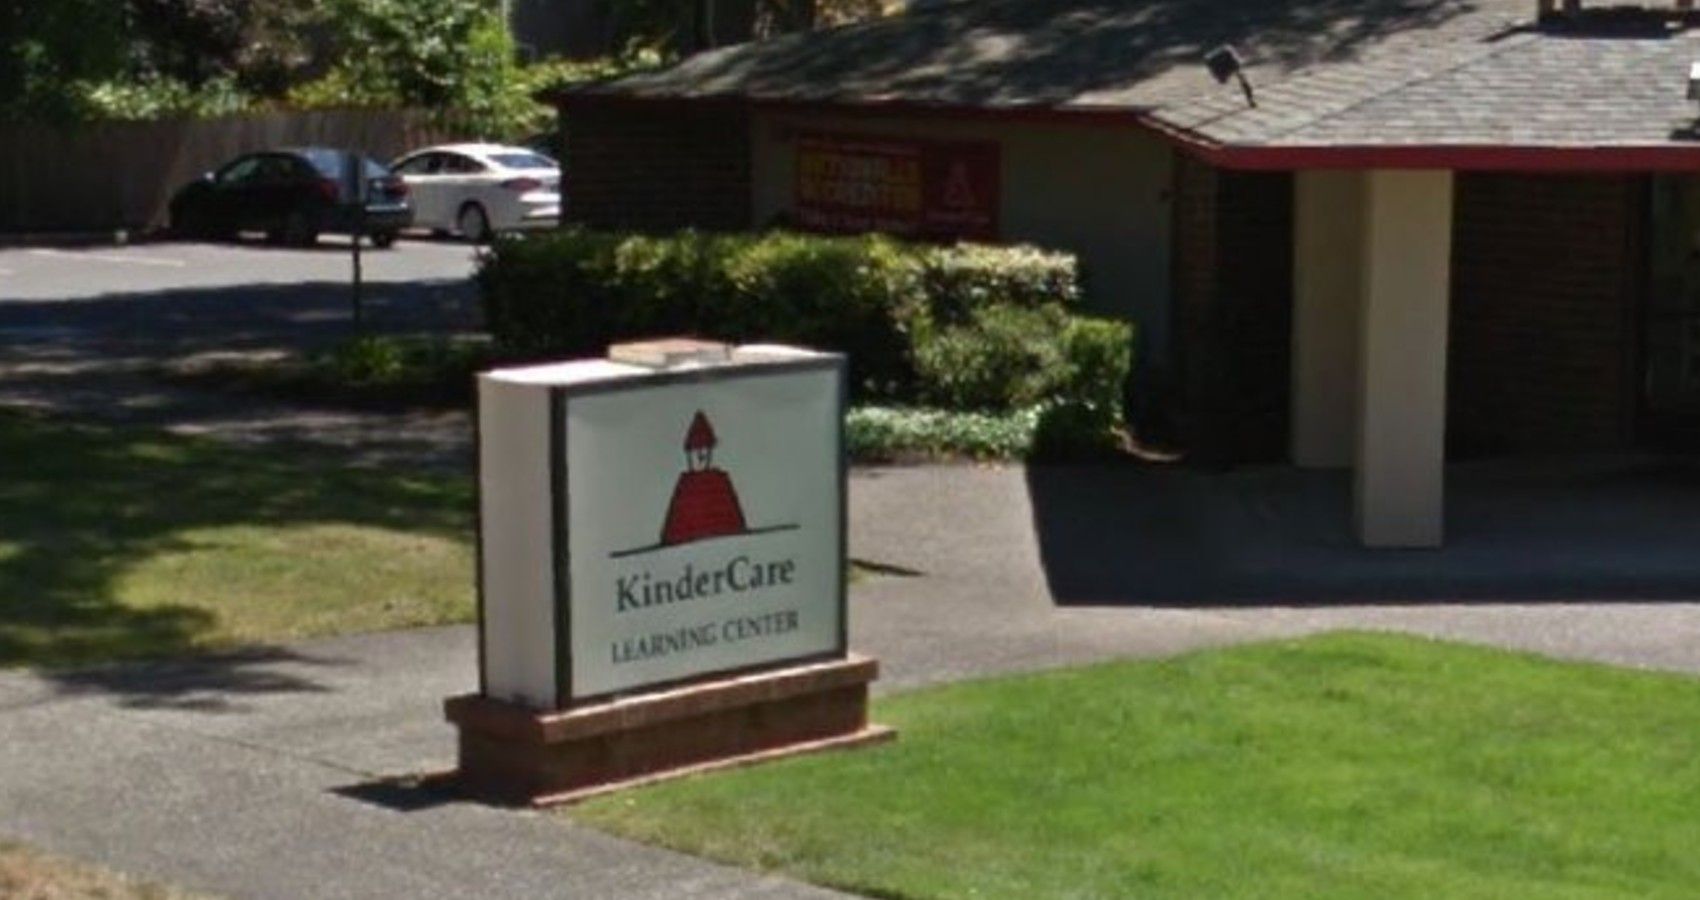 A sign for Kindercare on lawn